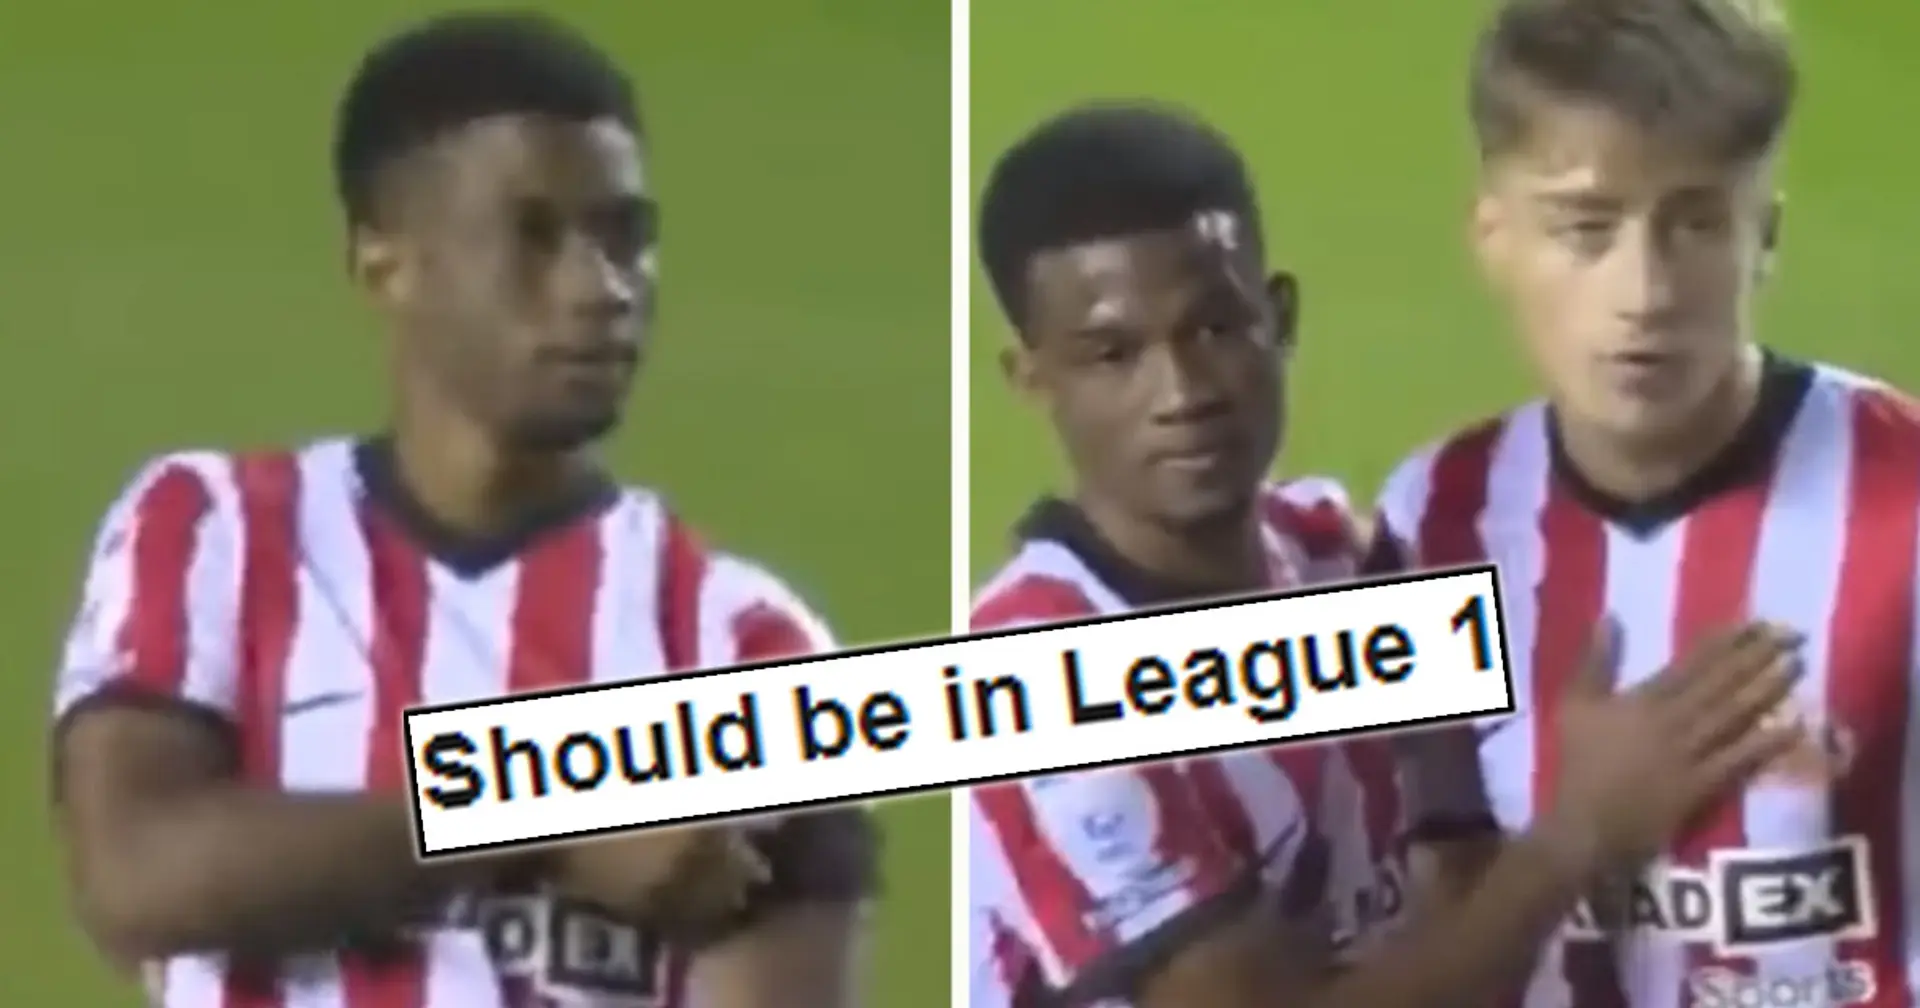 'Aimed too high for him': United fans react to Amad Diallo's slow start to Sunderland loan